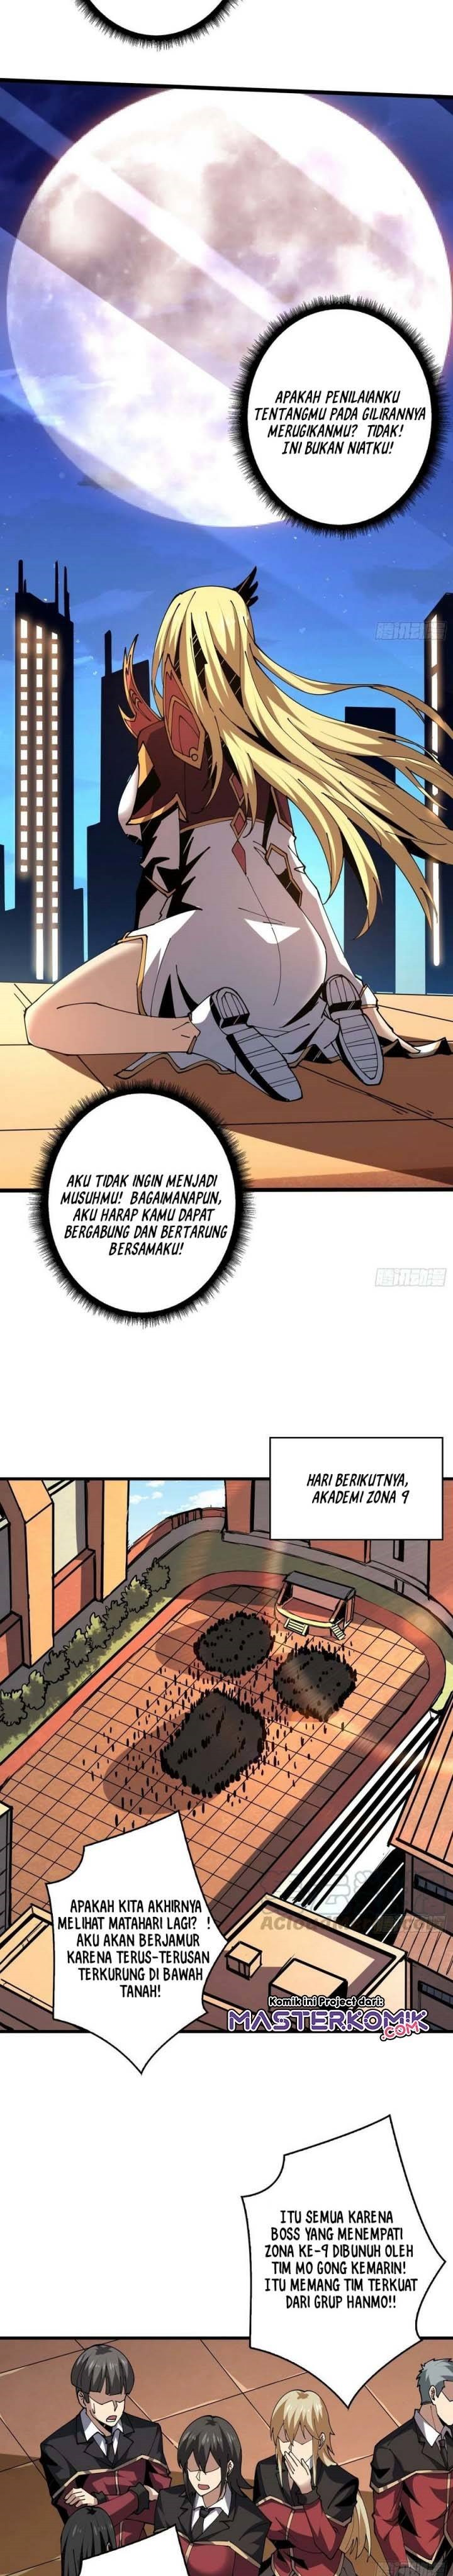 King Account At The Start Chapter 90